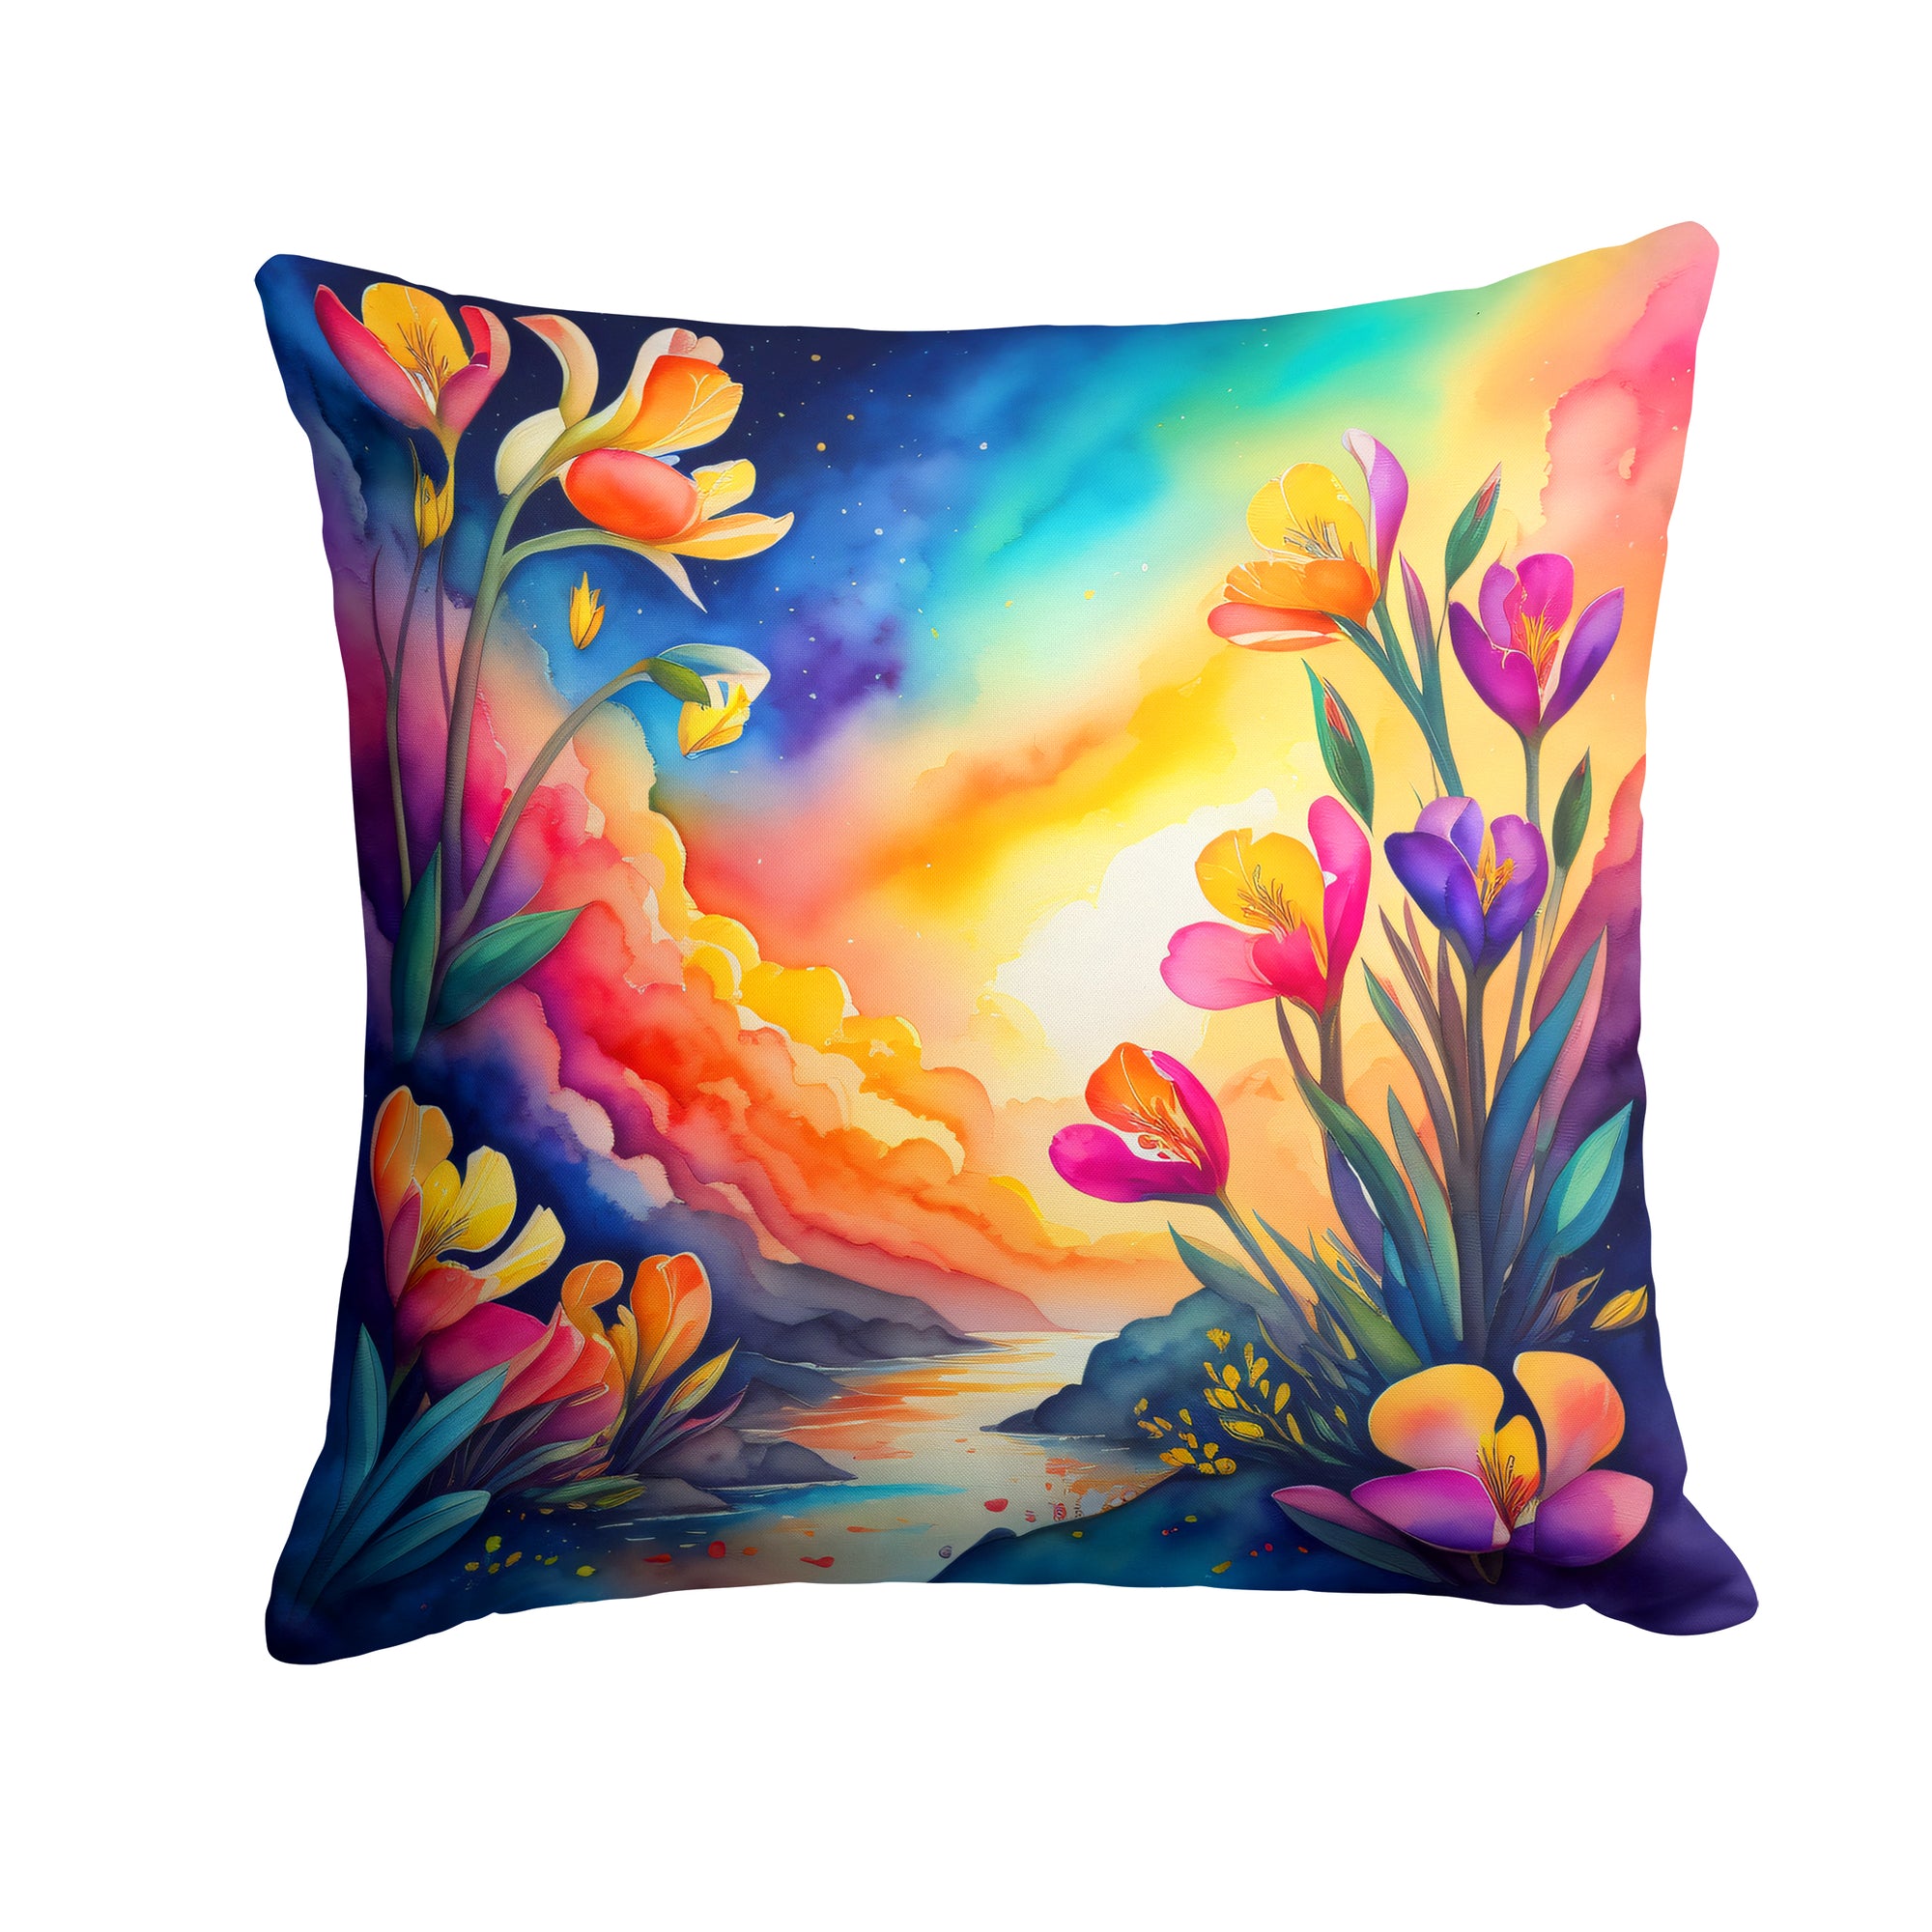 Buy this Colorful Freesia Fabric Decorative Pillow